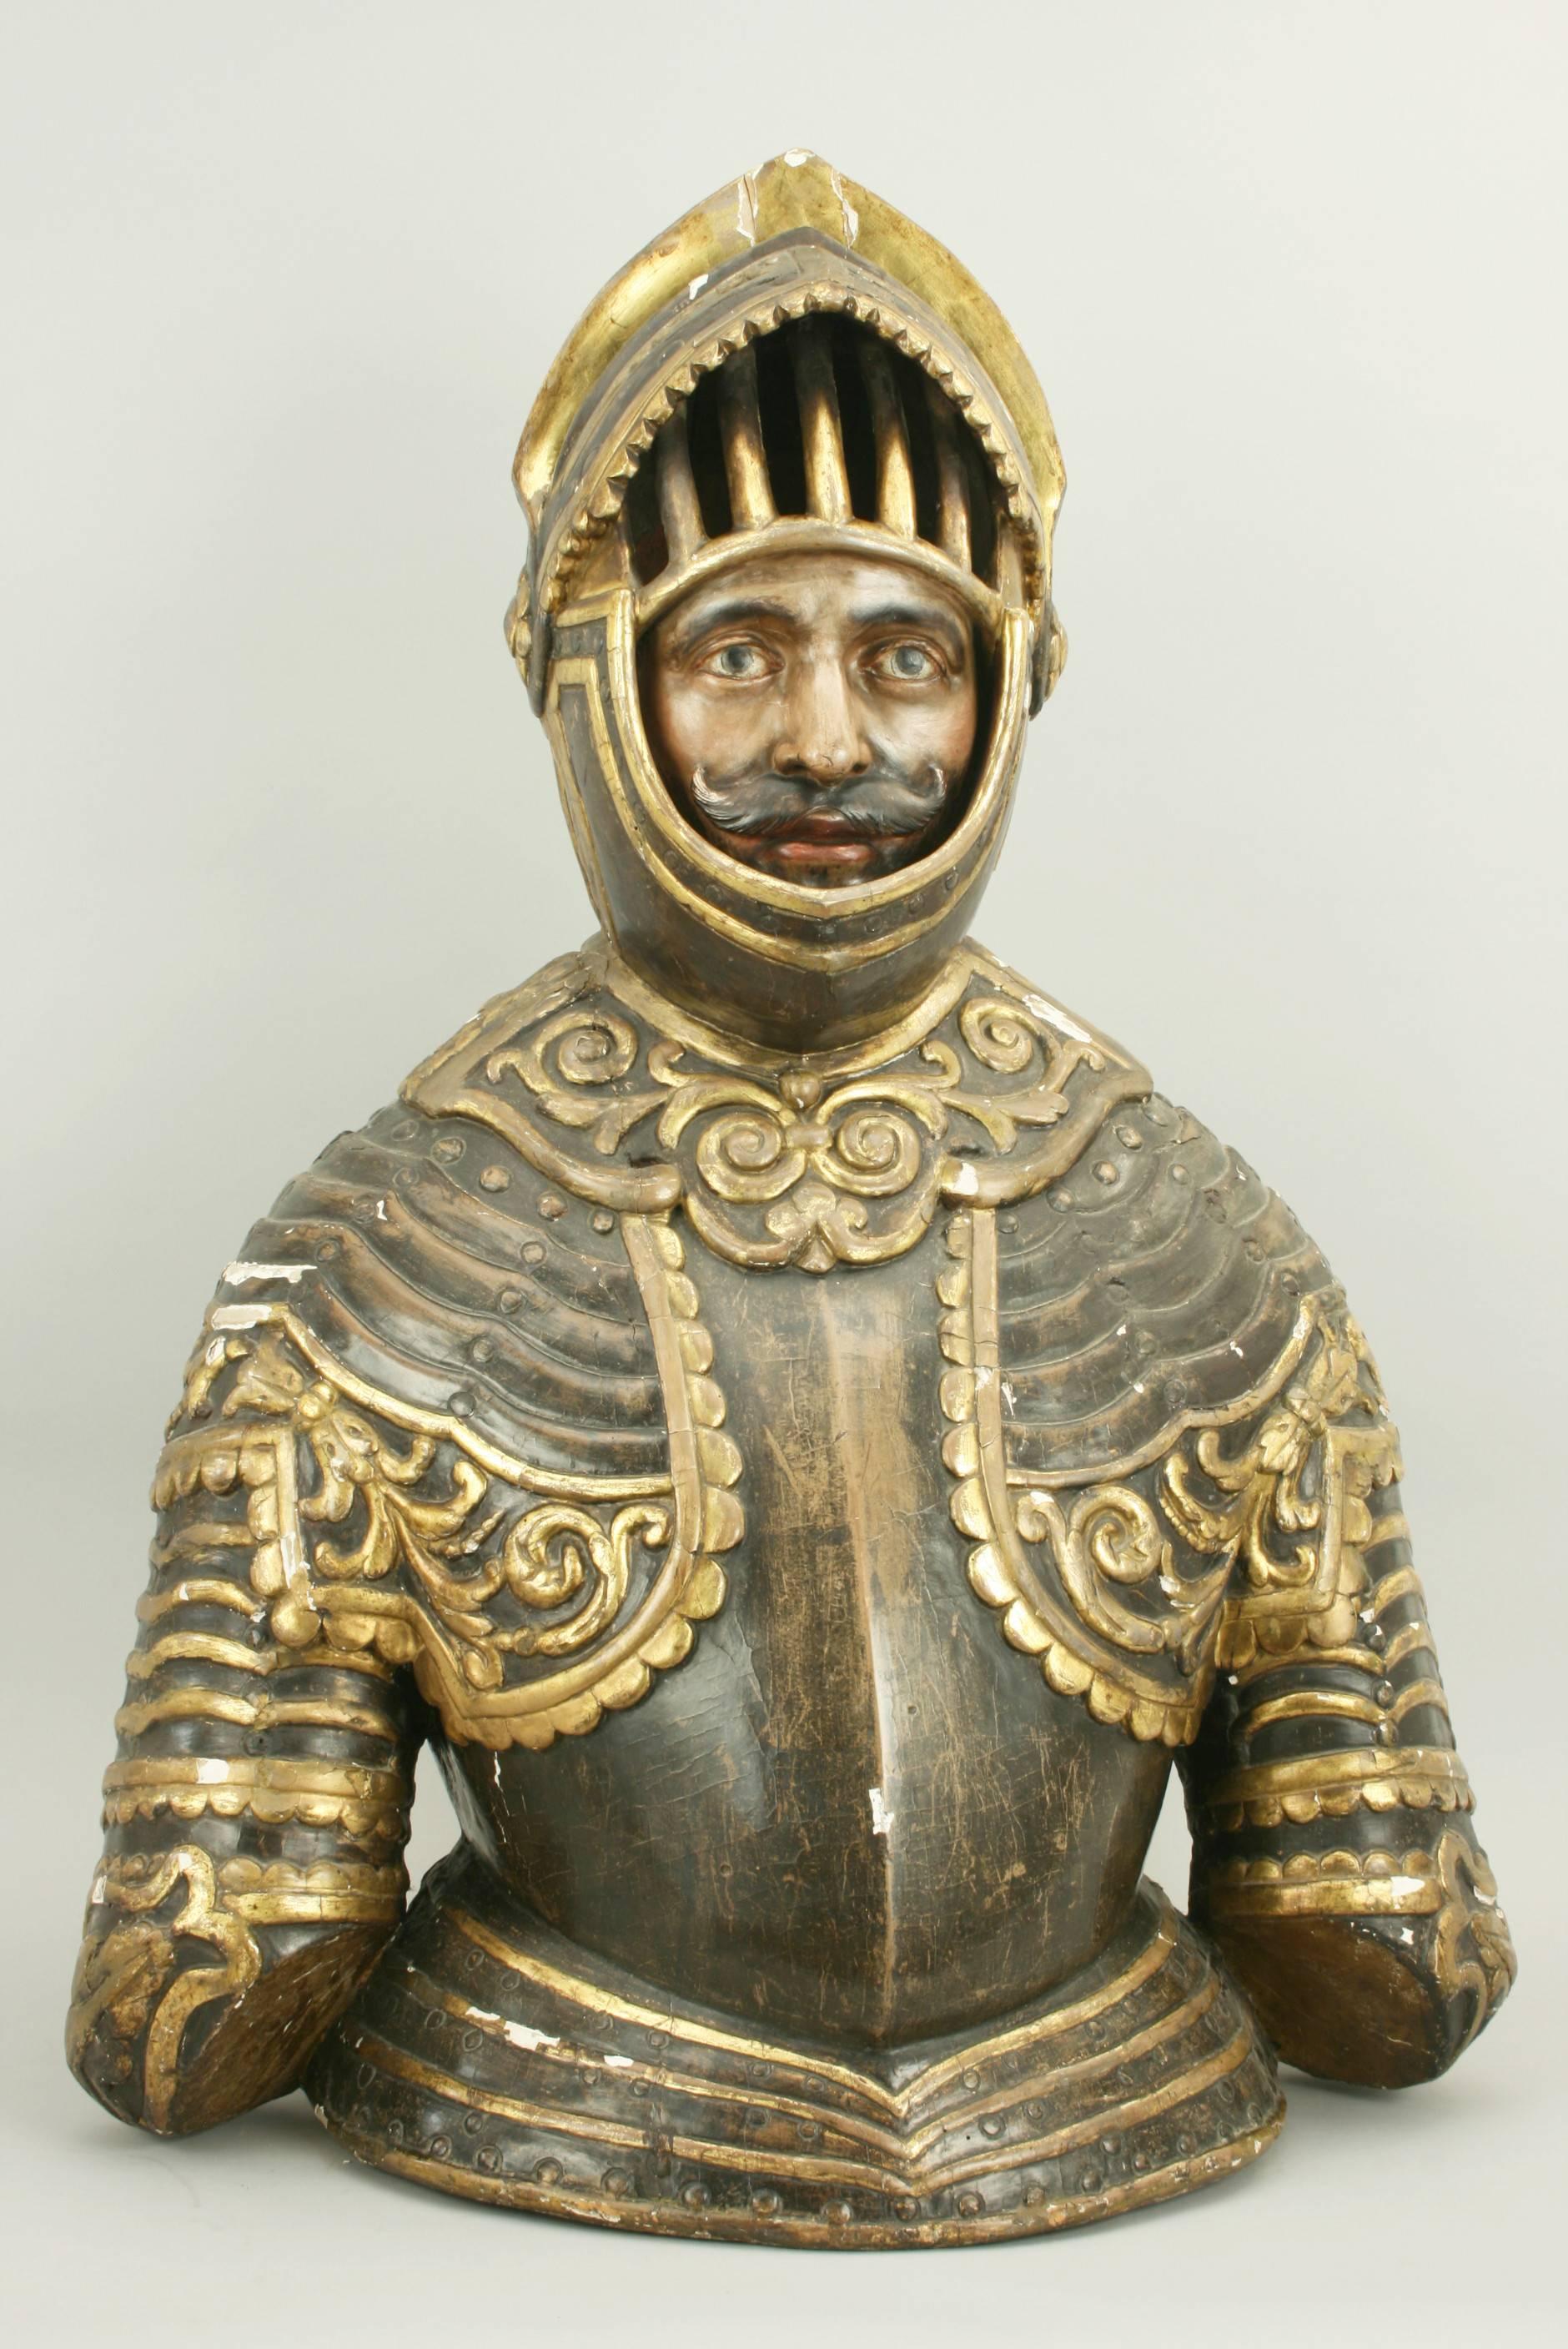 Wooden bust of a knight.
A wonderful armored knight carved from lime wood. The knight is well carved with the face (with moustache) looking out of the helmet with a raised visor. The black and gold Armour is well decorated; the helmet has a plume